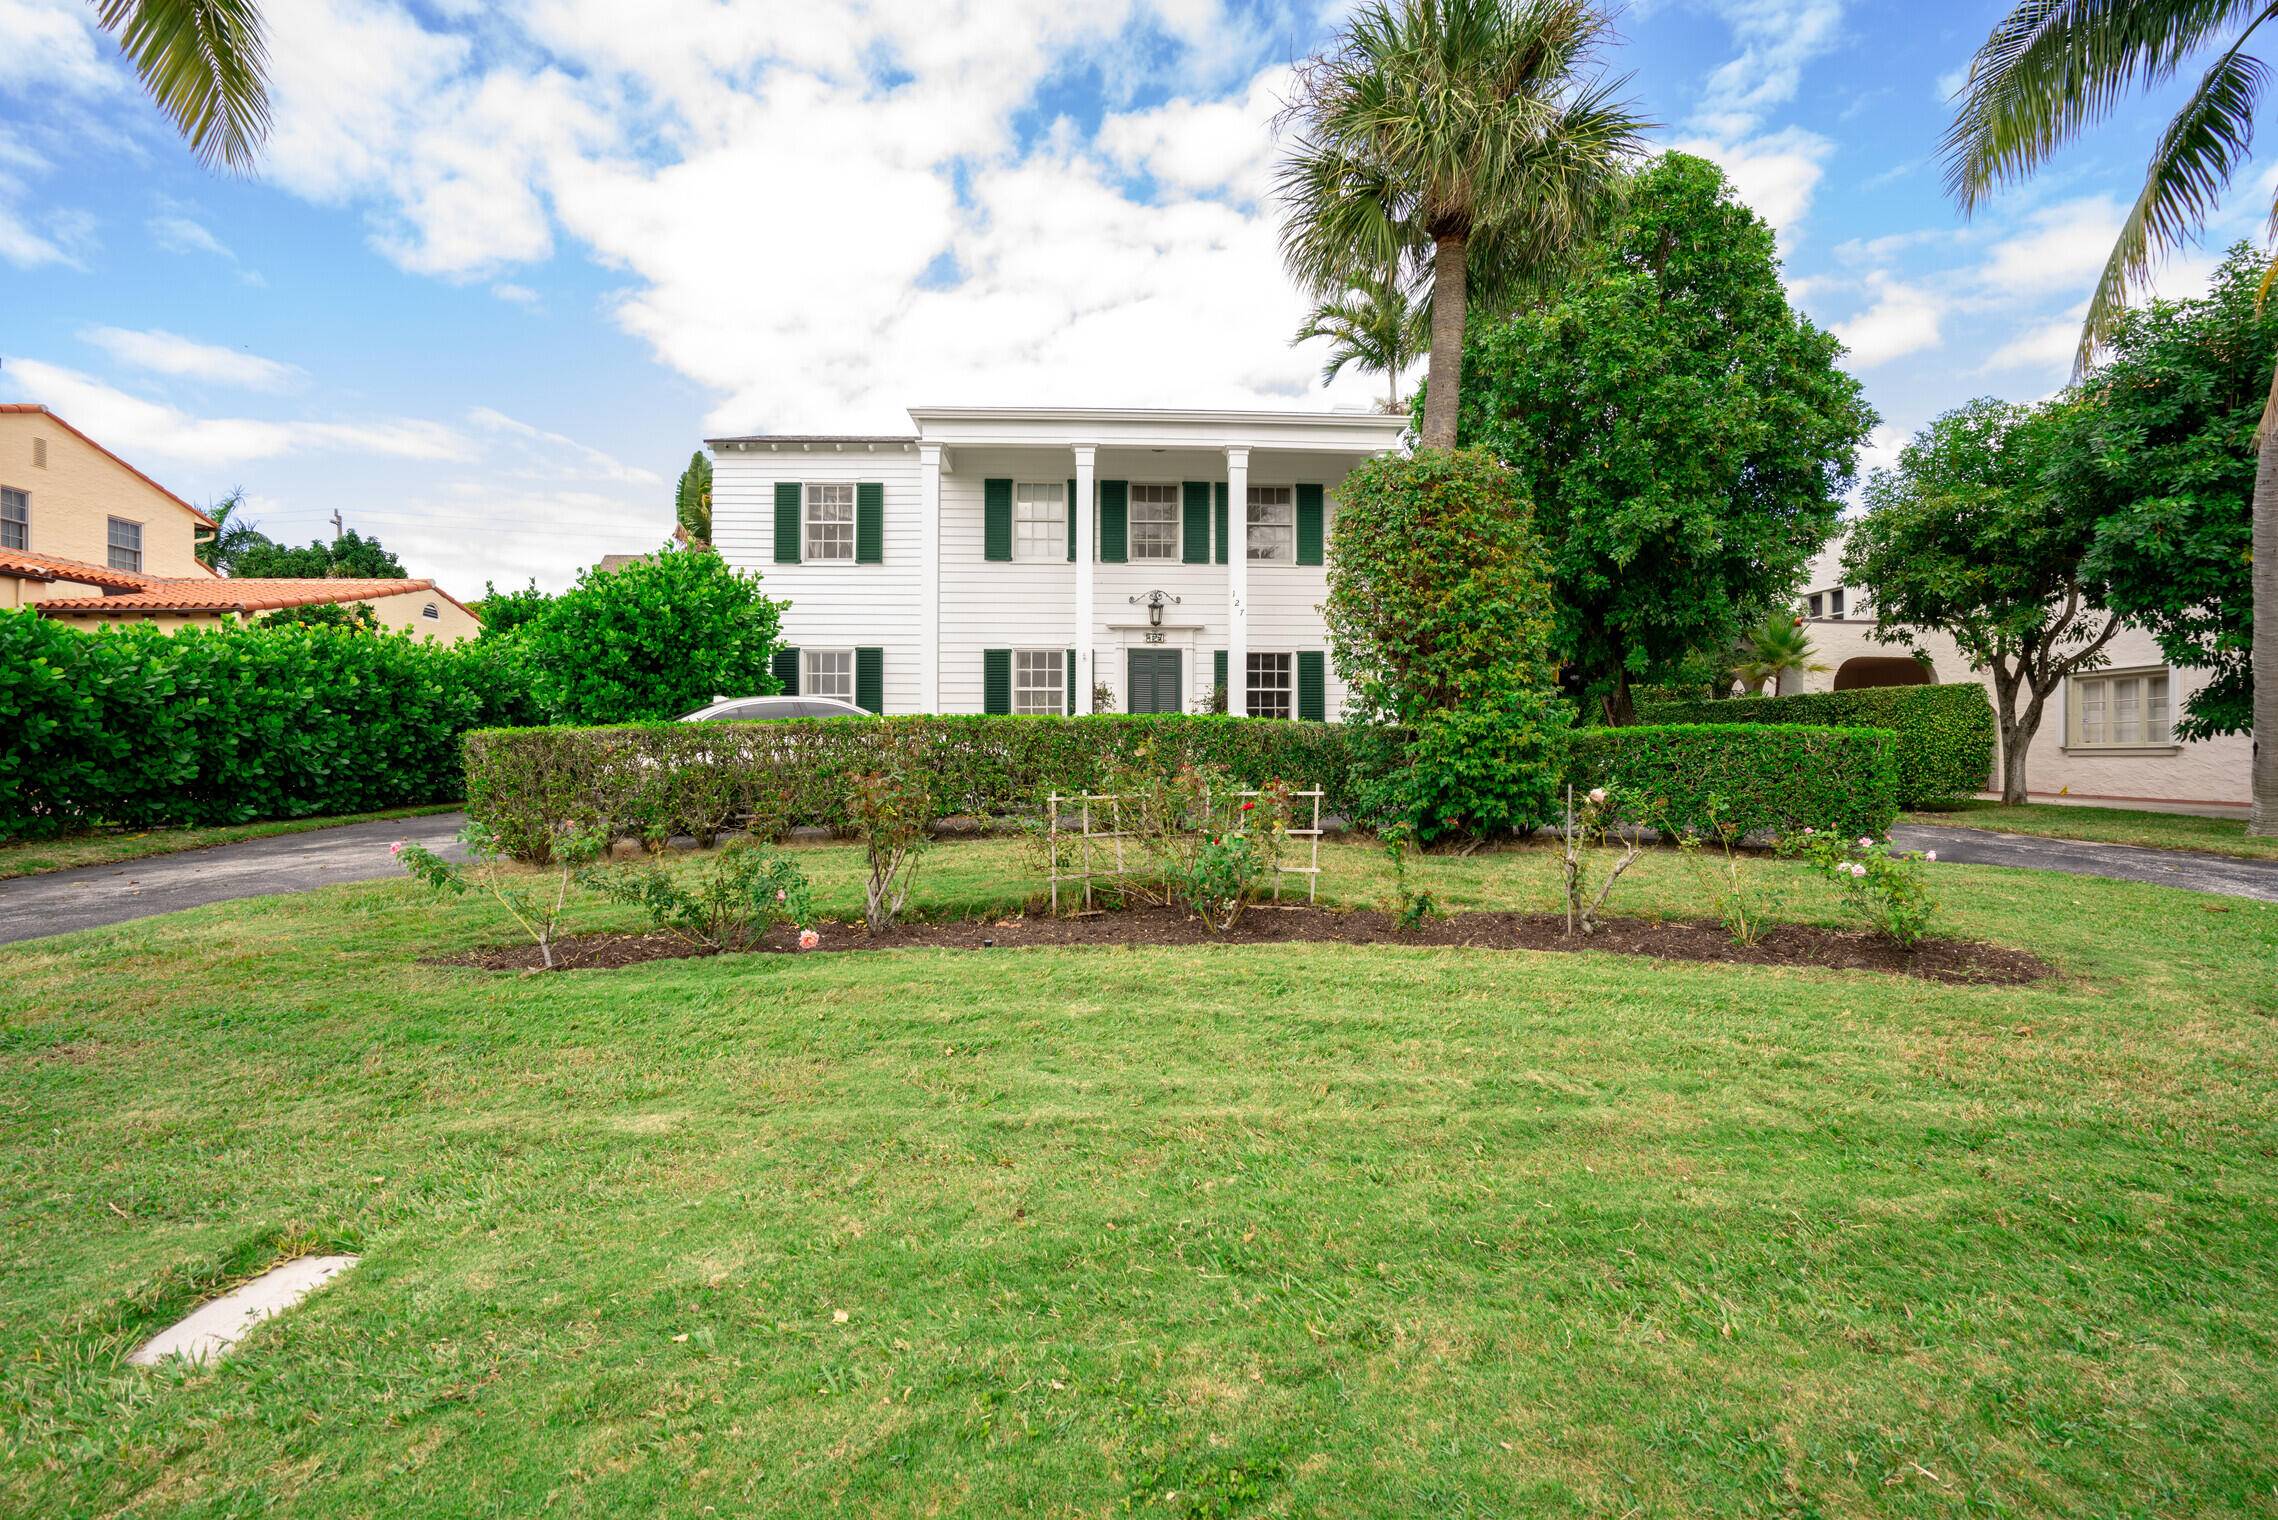 Beautiful Colonial historic home on one of best streets in SoSo, Murray Road.